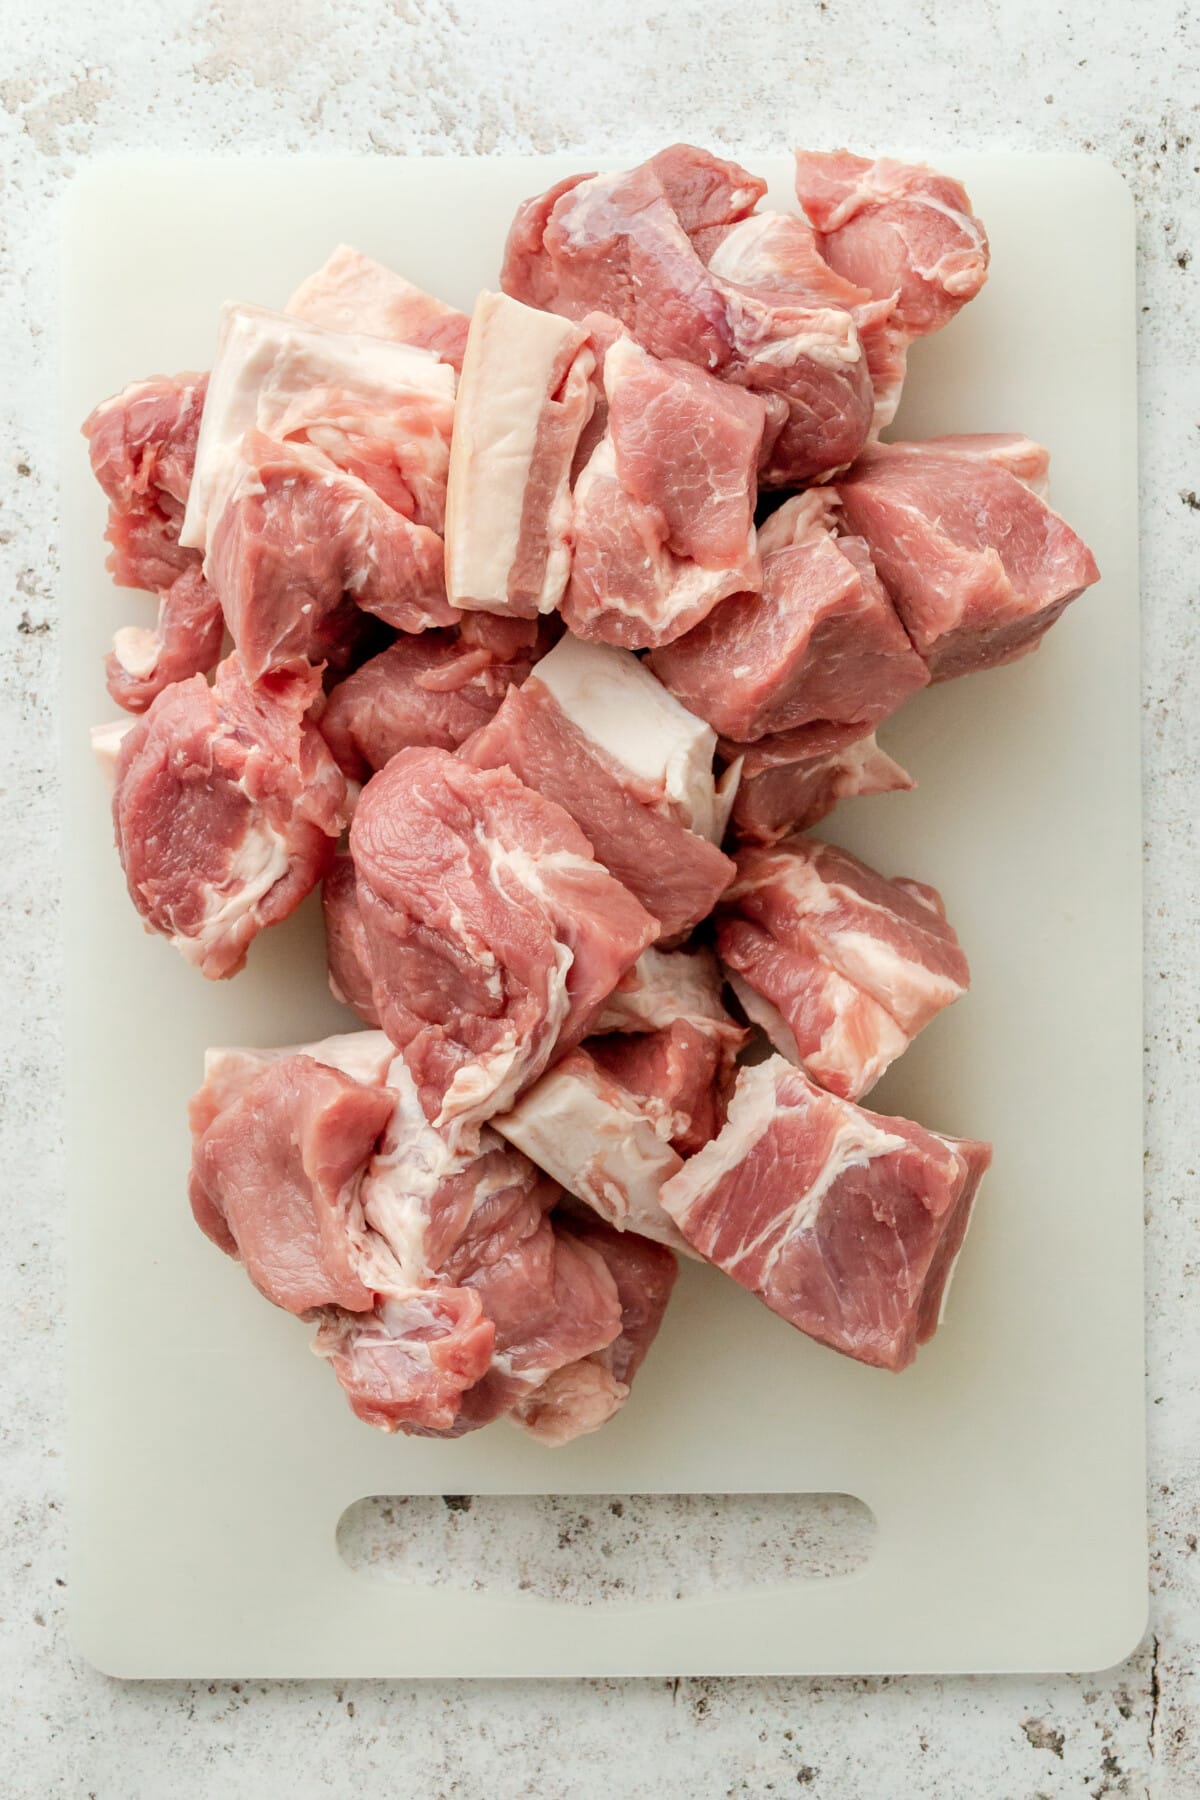 Chunks of pork shoulder sit on a plastic chopping board on a light grey surface.